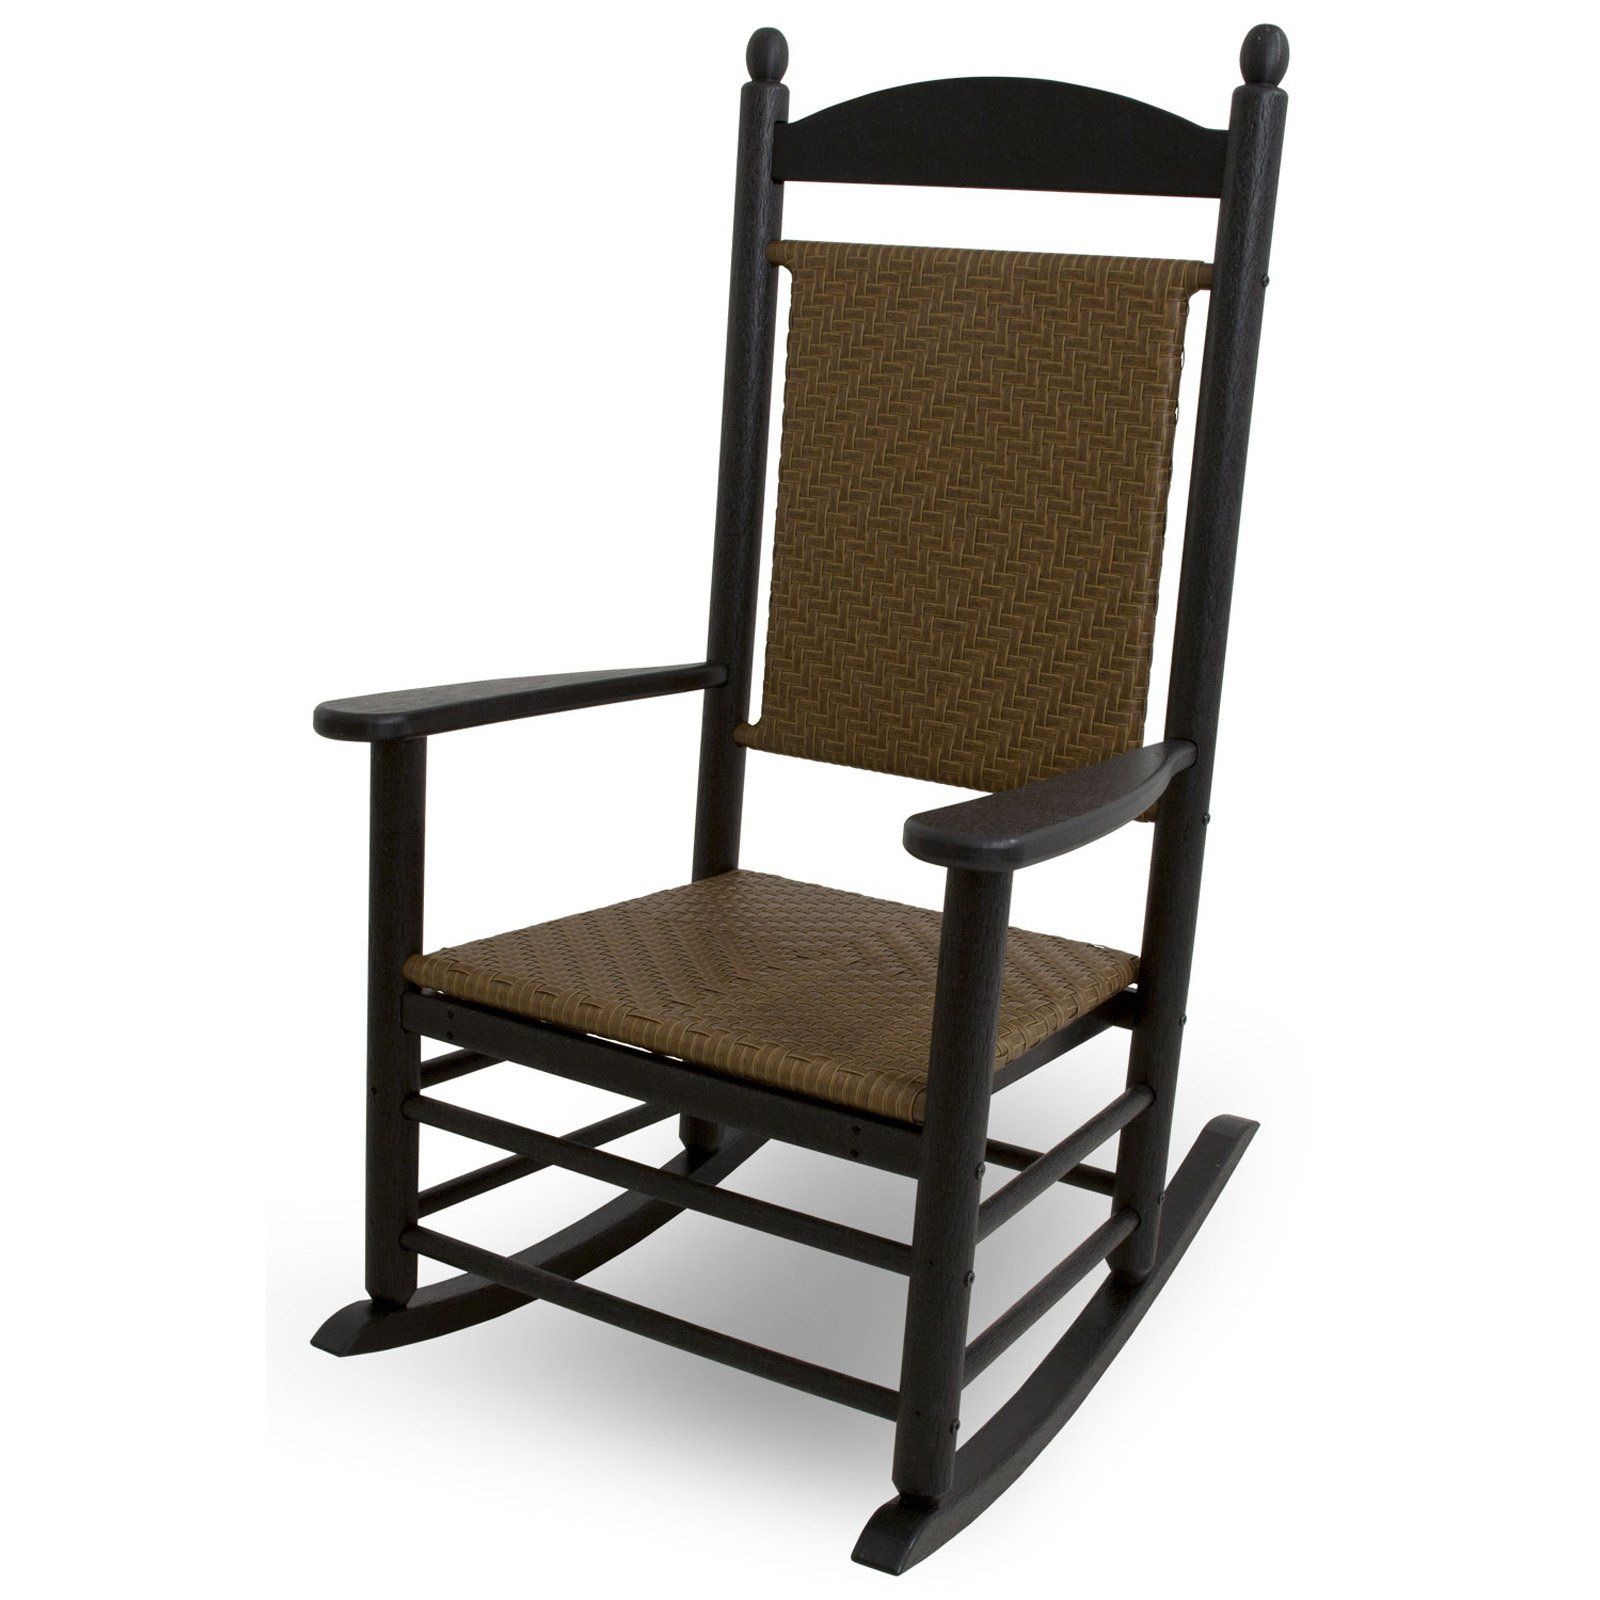 Outdoor Polywoodâ® Jefferson Recycled Plastic Rocking Chair Intended For Black Plastic Rocking Chairs (View 17 of 20)